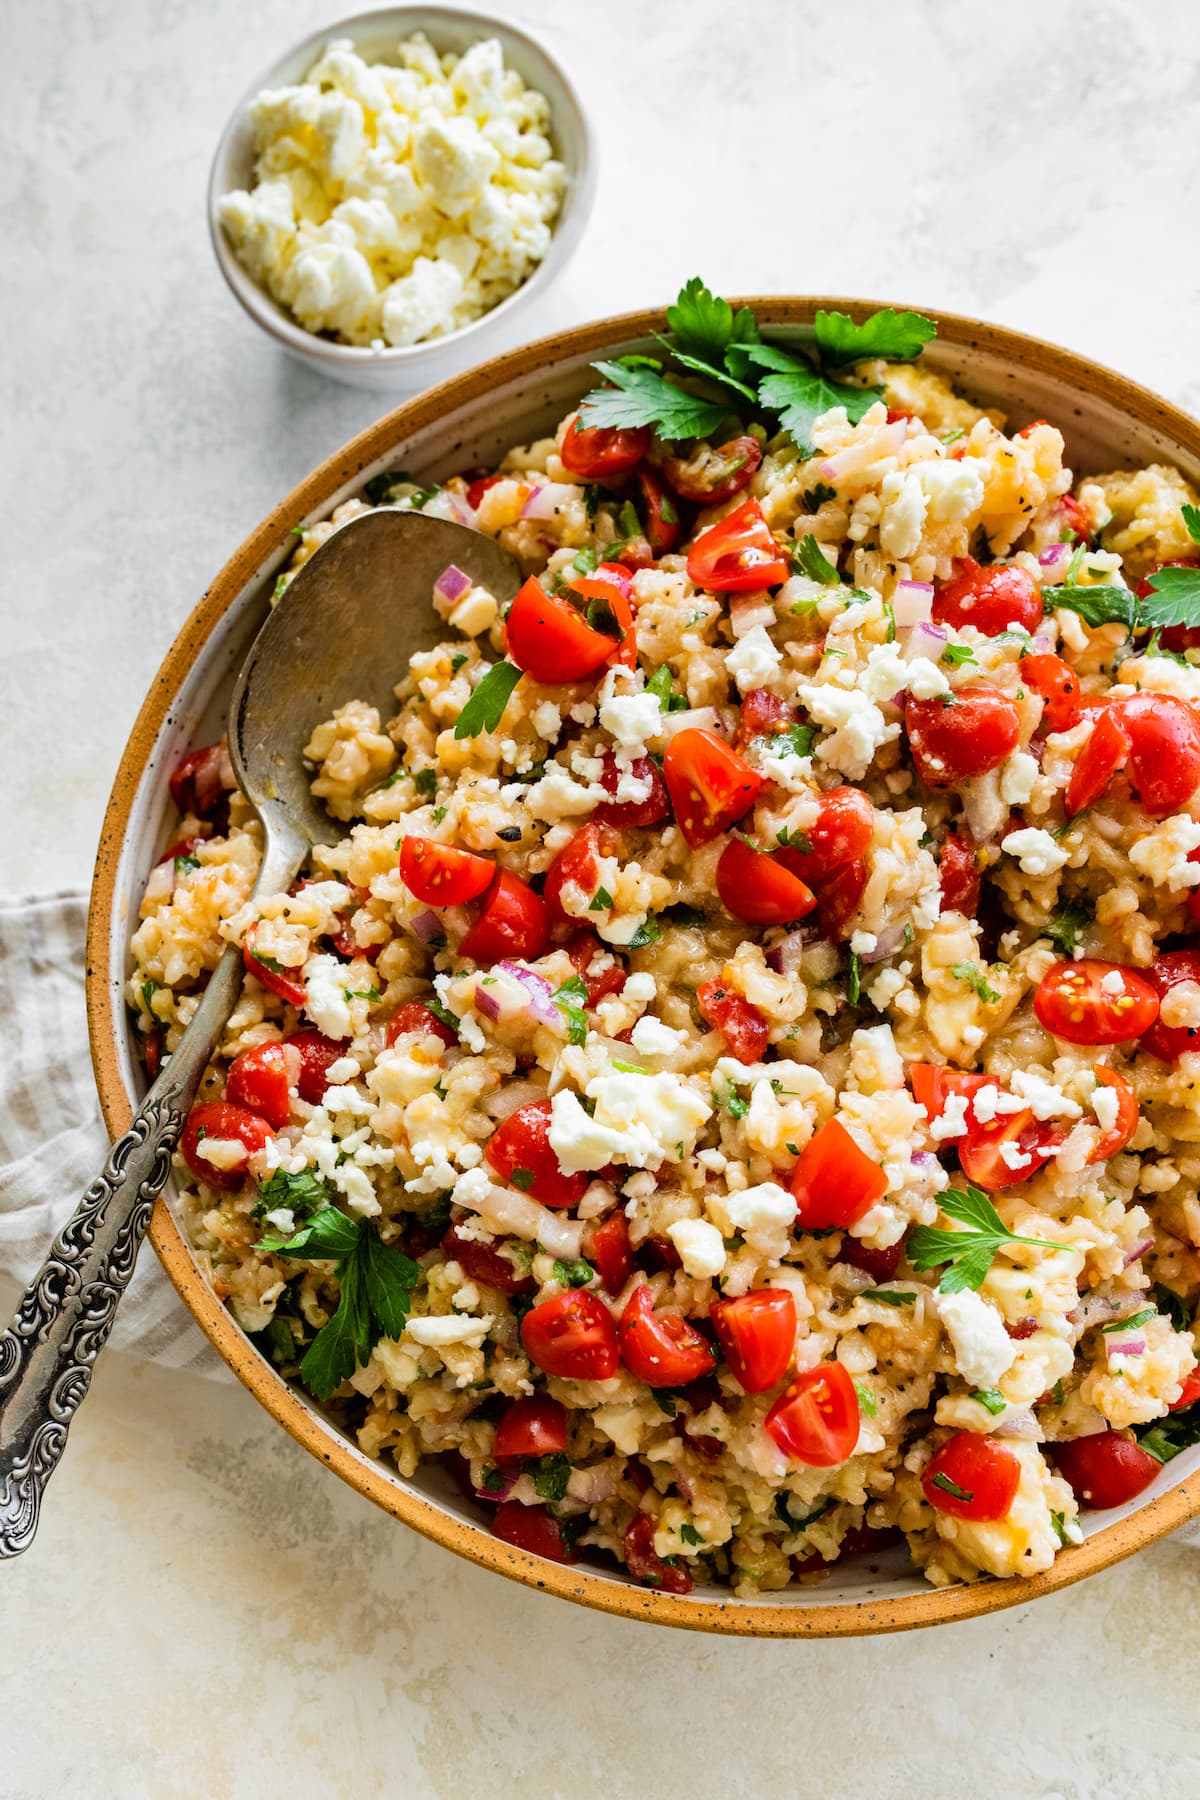 Mediterranean brown rice salad in a bowl with a metal serving spoon.